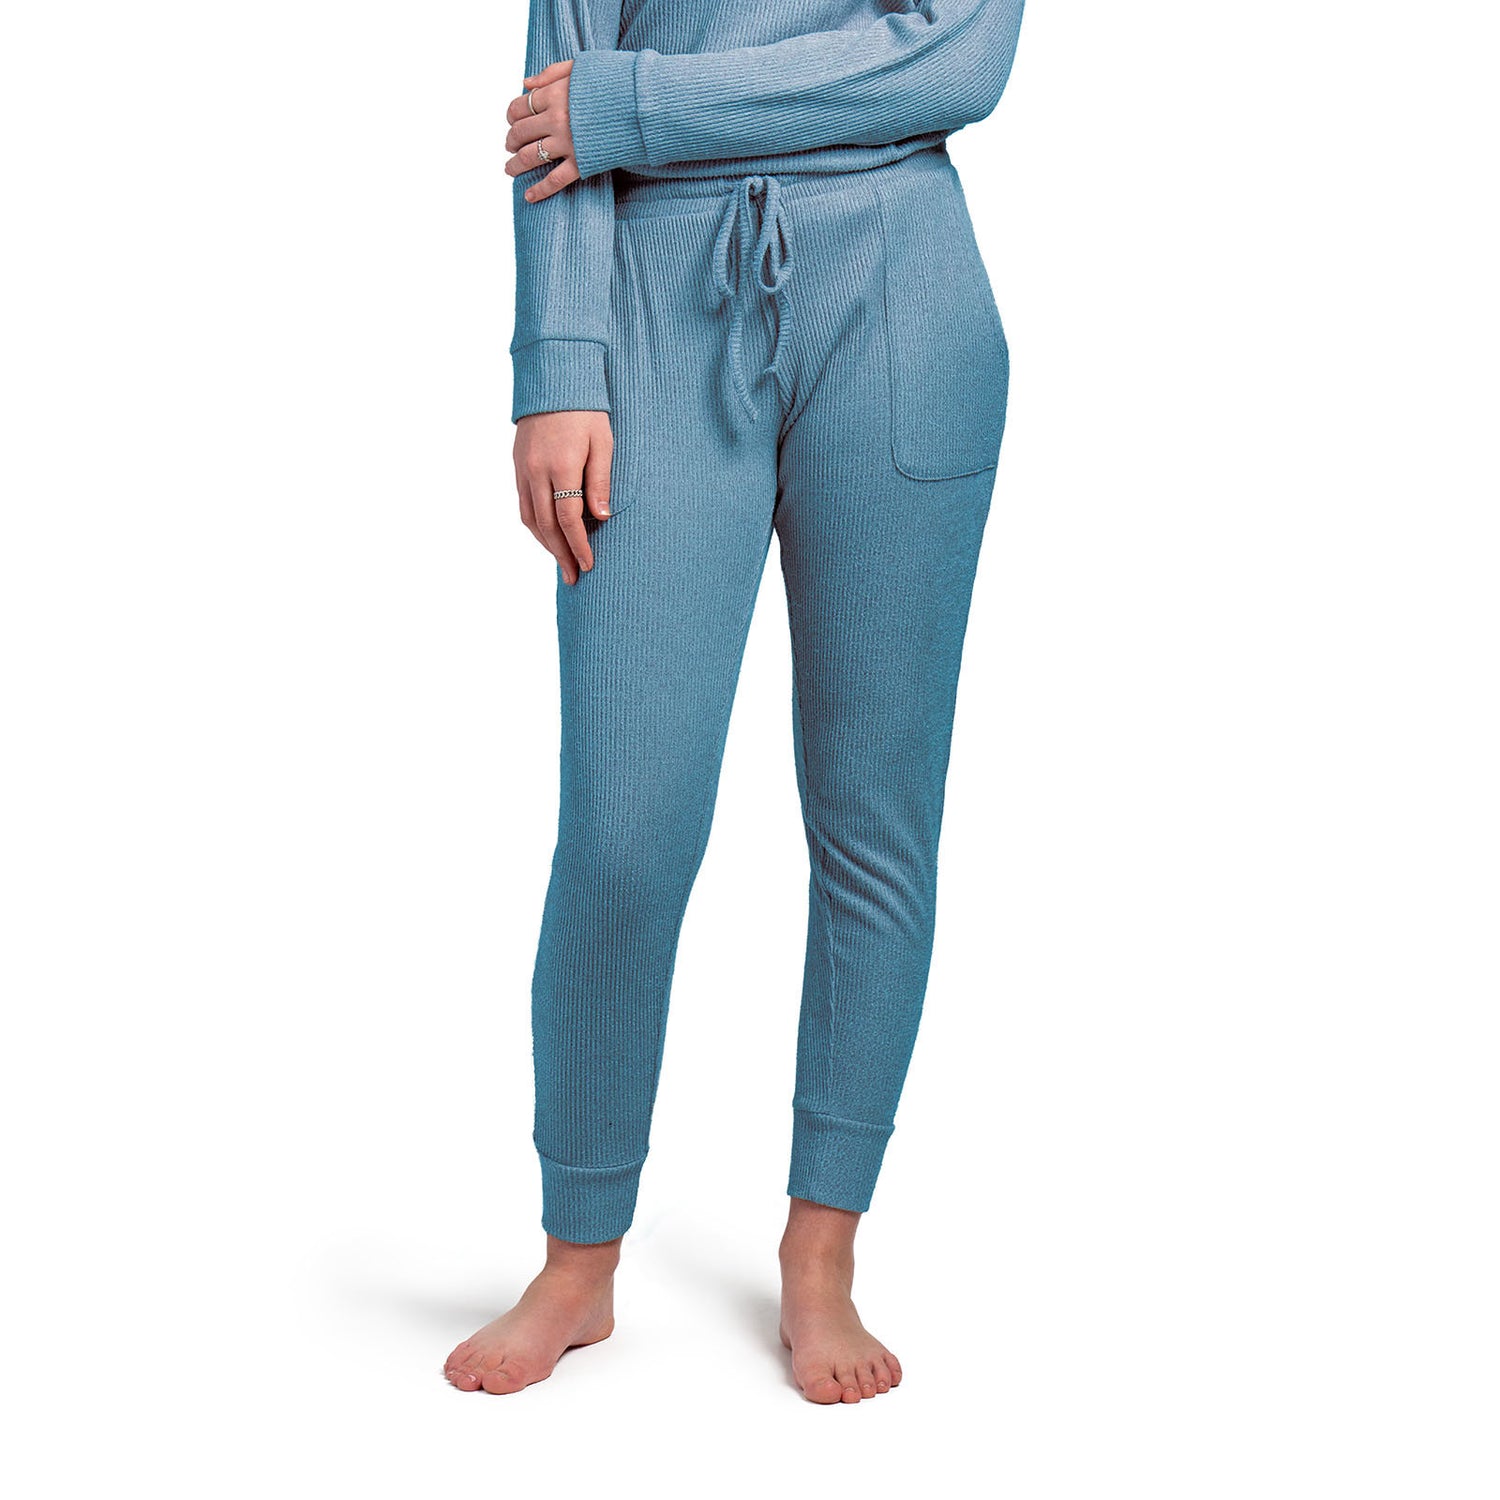 Treat yourself to cuddle worthy softness! We curated these cozy rib knit pants for luxurious comfort with a buttery mid-weight fabric and cozy side pockets. Matching drawstring pouch packaging makes this item a great gift! Color blue.